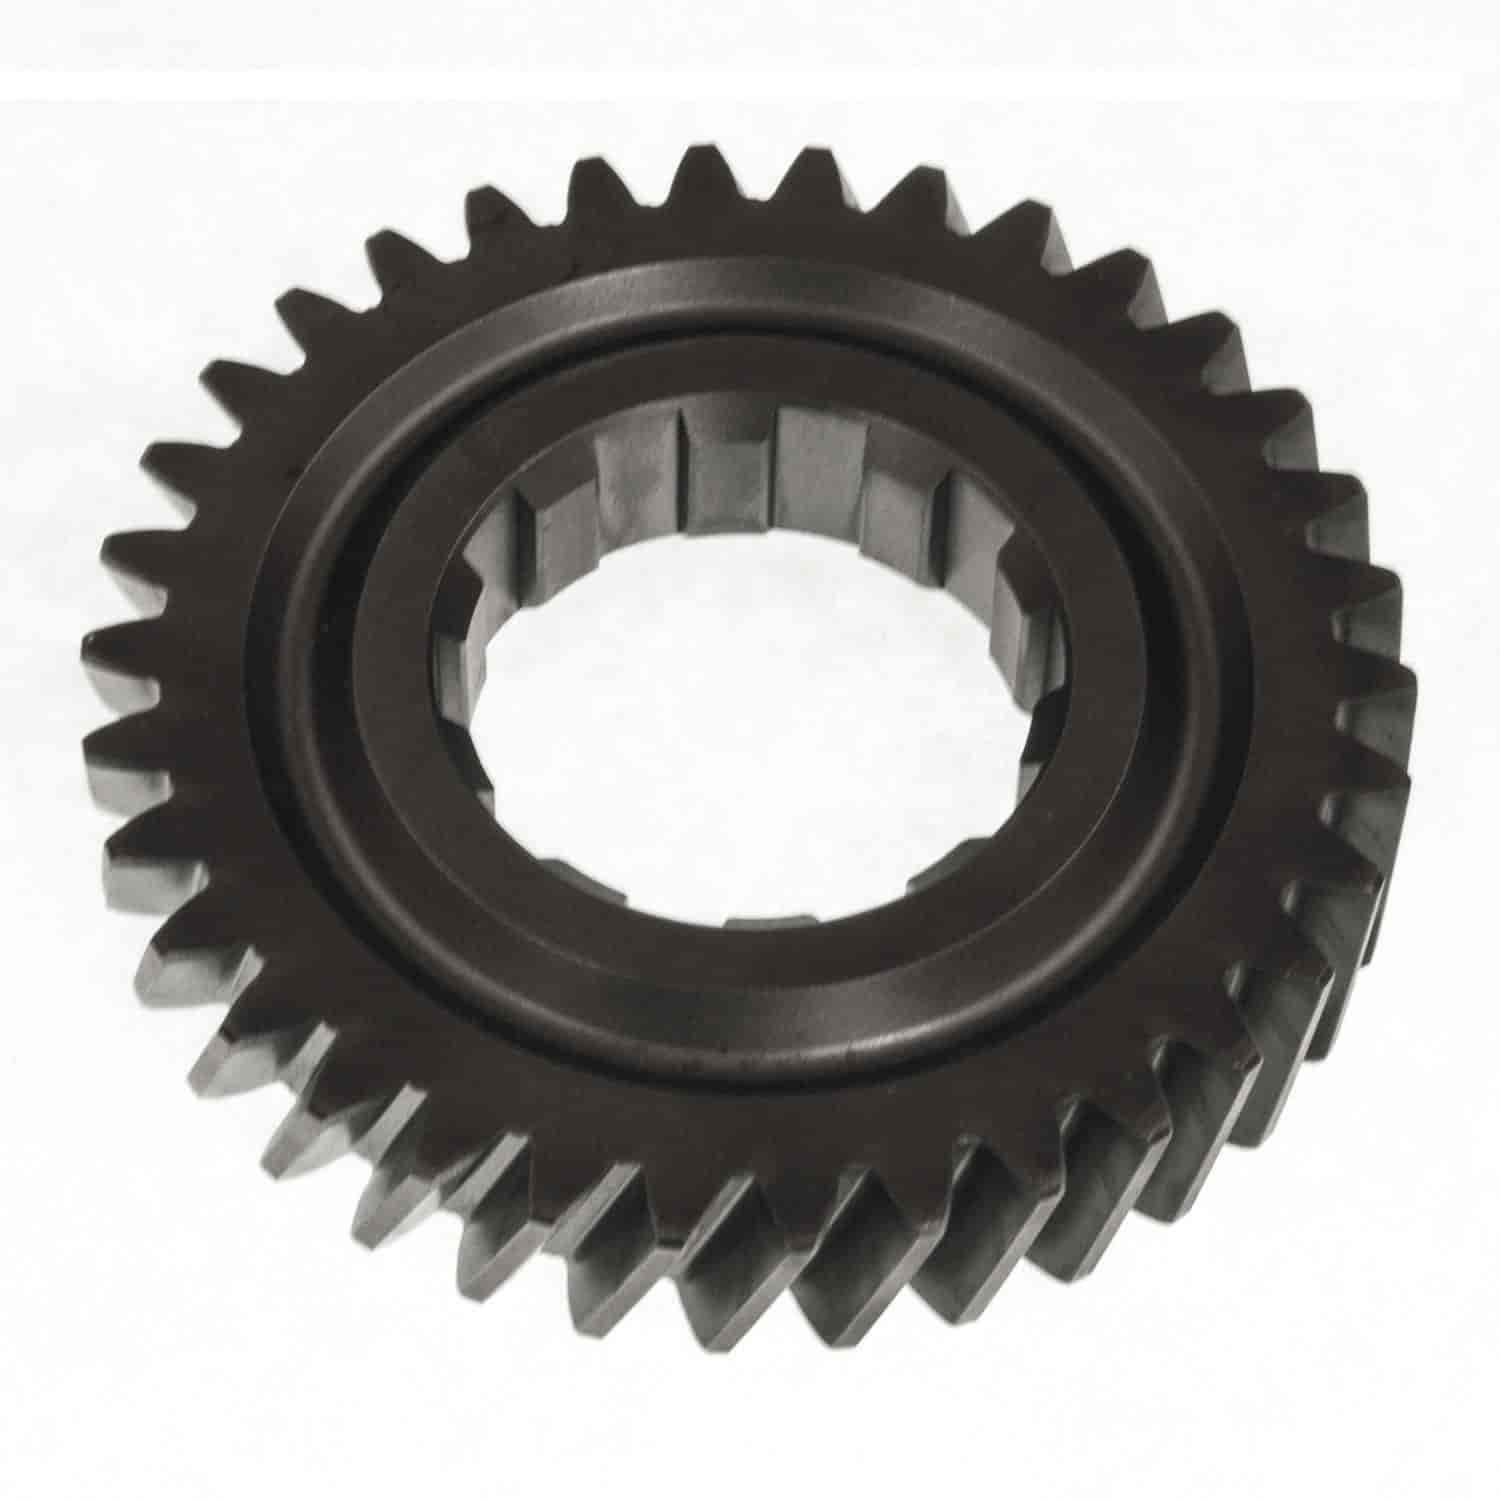 6th Gear Clustershaft 25/34 Tooth Count